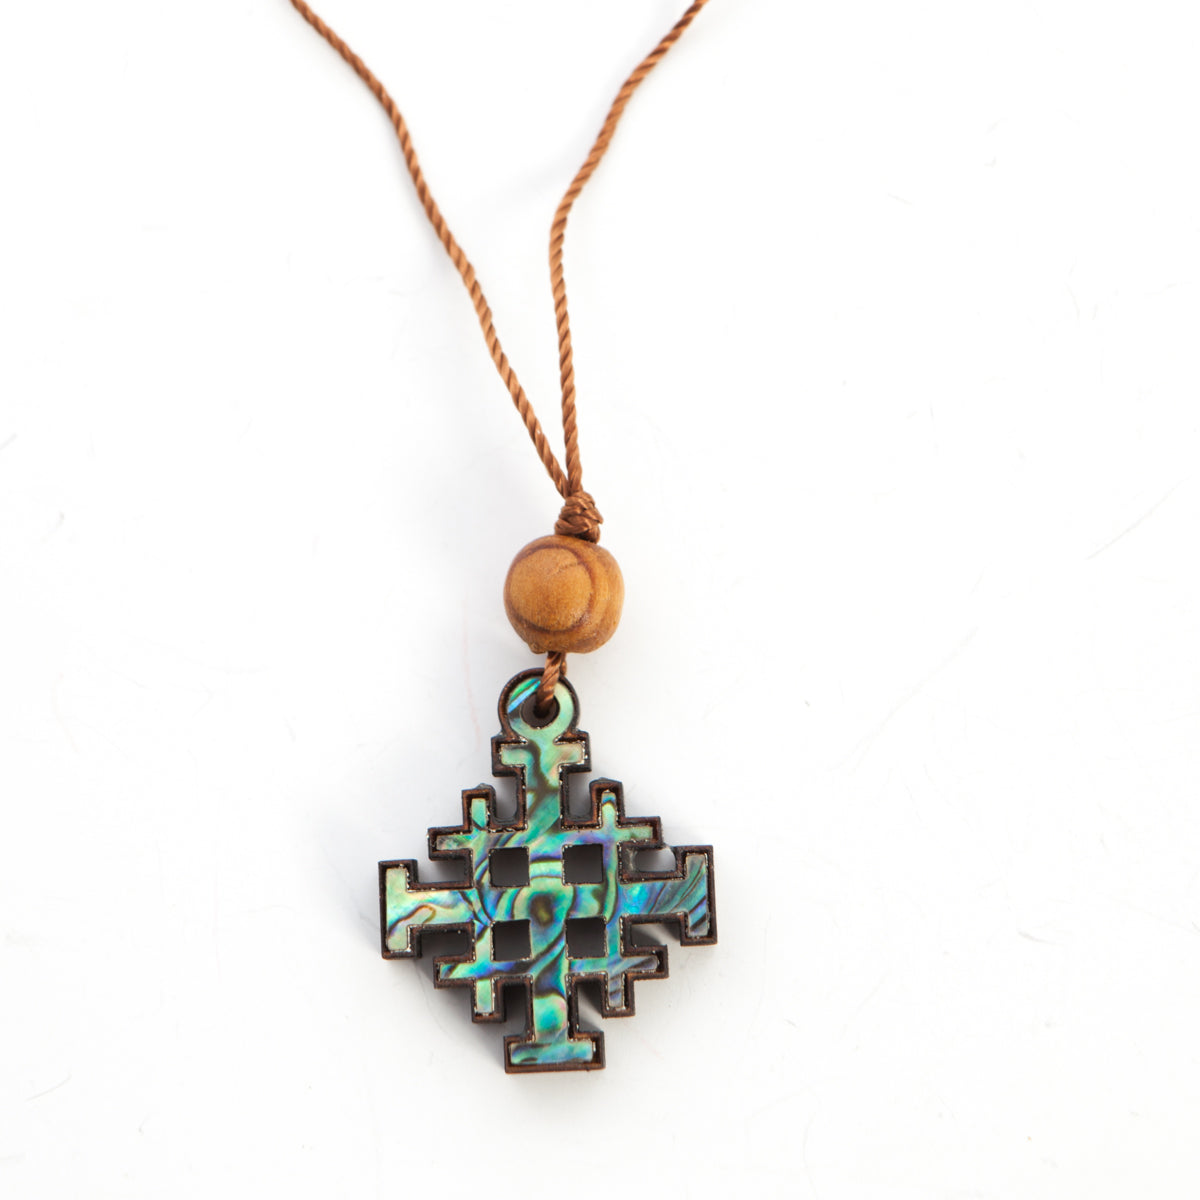 Jerusalem Cross Necklace with a Bead  (Olive Wood and Colorful Mother of Pearl)